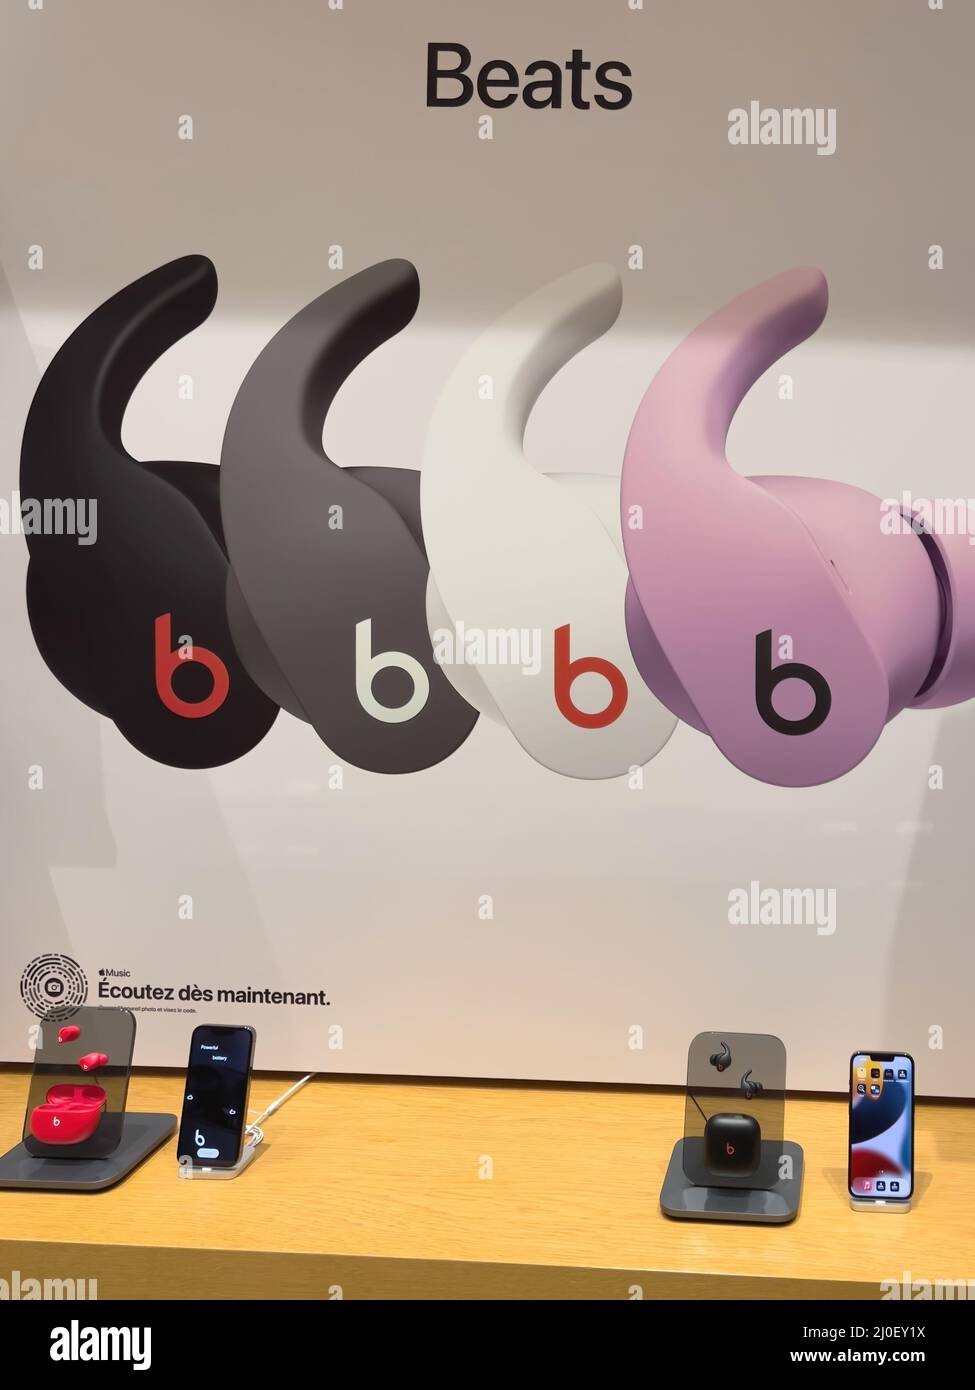 Paris, France - Mar 18, 2022: Presentation of new Beats Fit Pro - Noise Cancelling Wireless Earbuds during the sales launch at the Apple Inc. flagship store Stock Photo